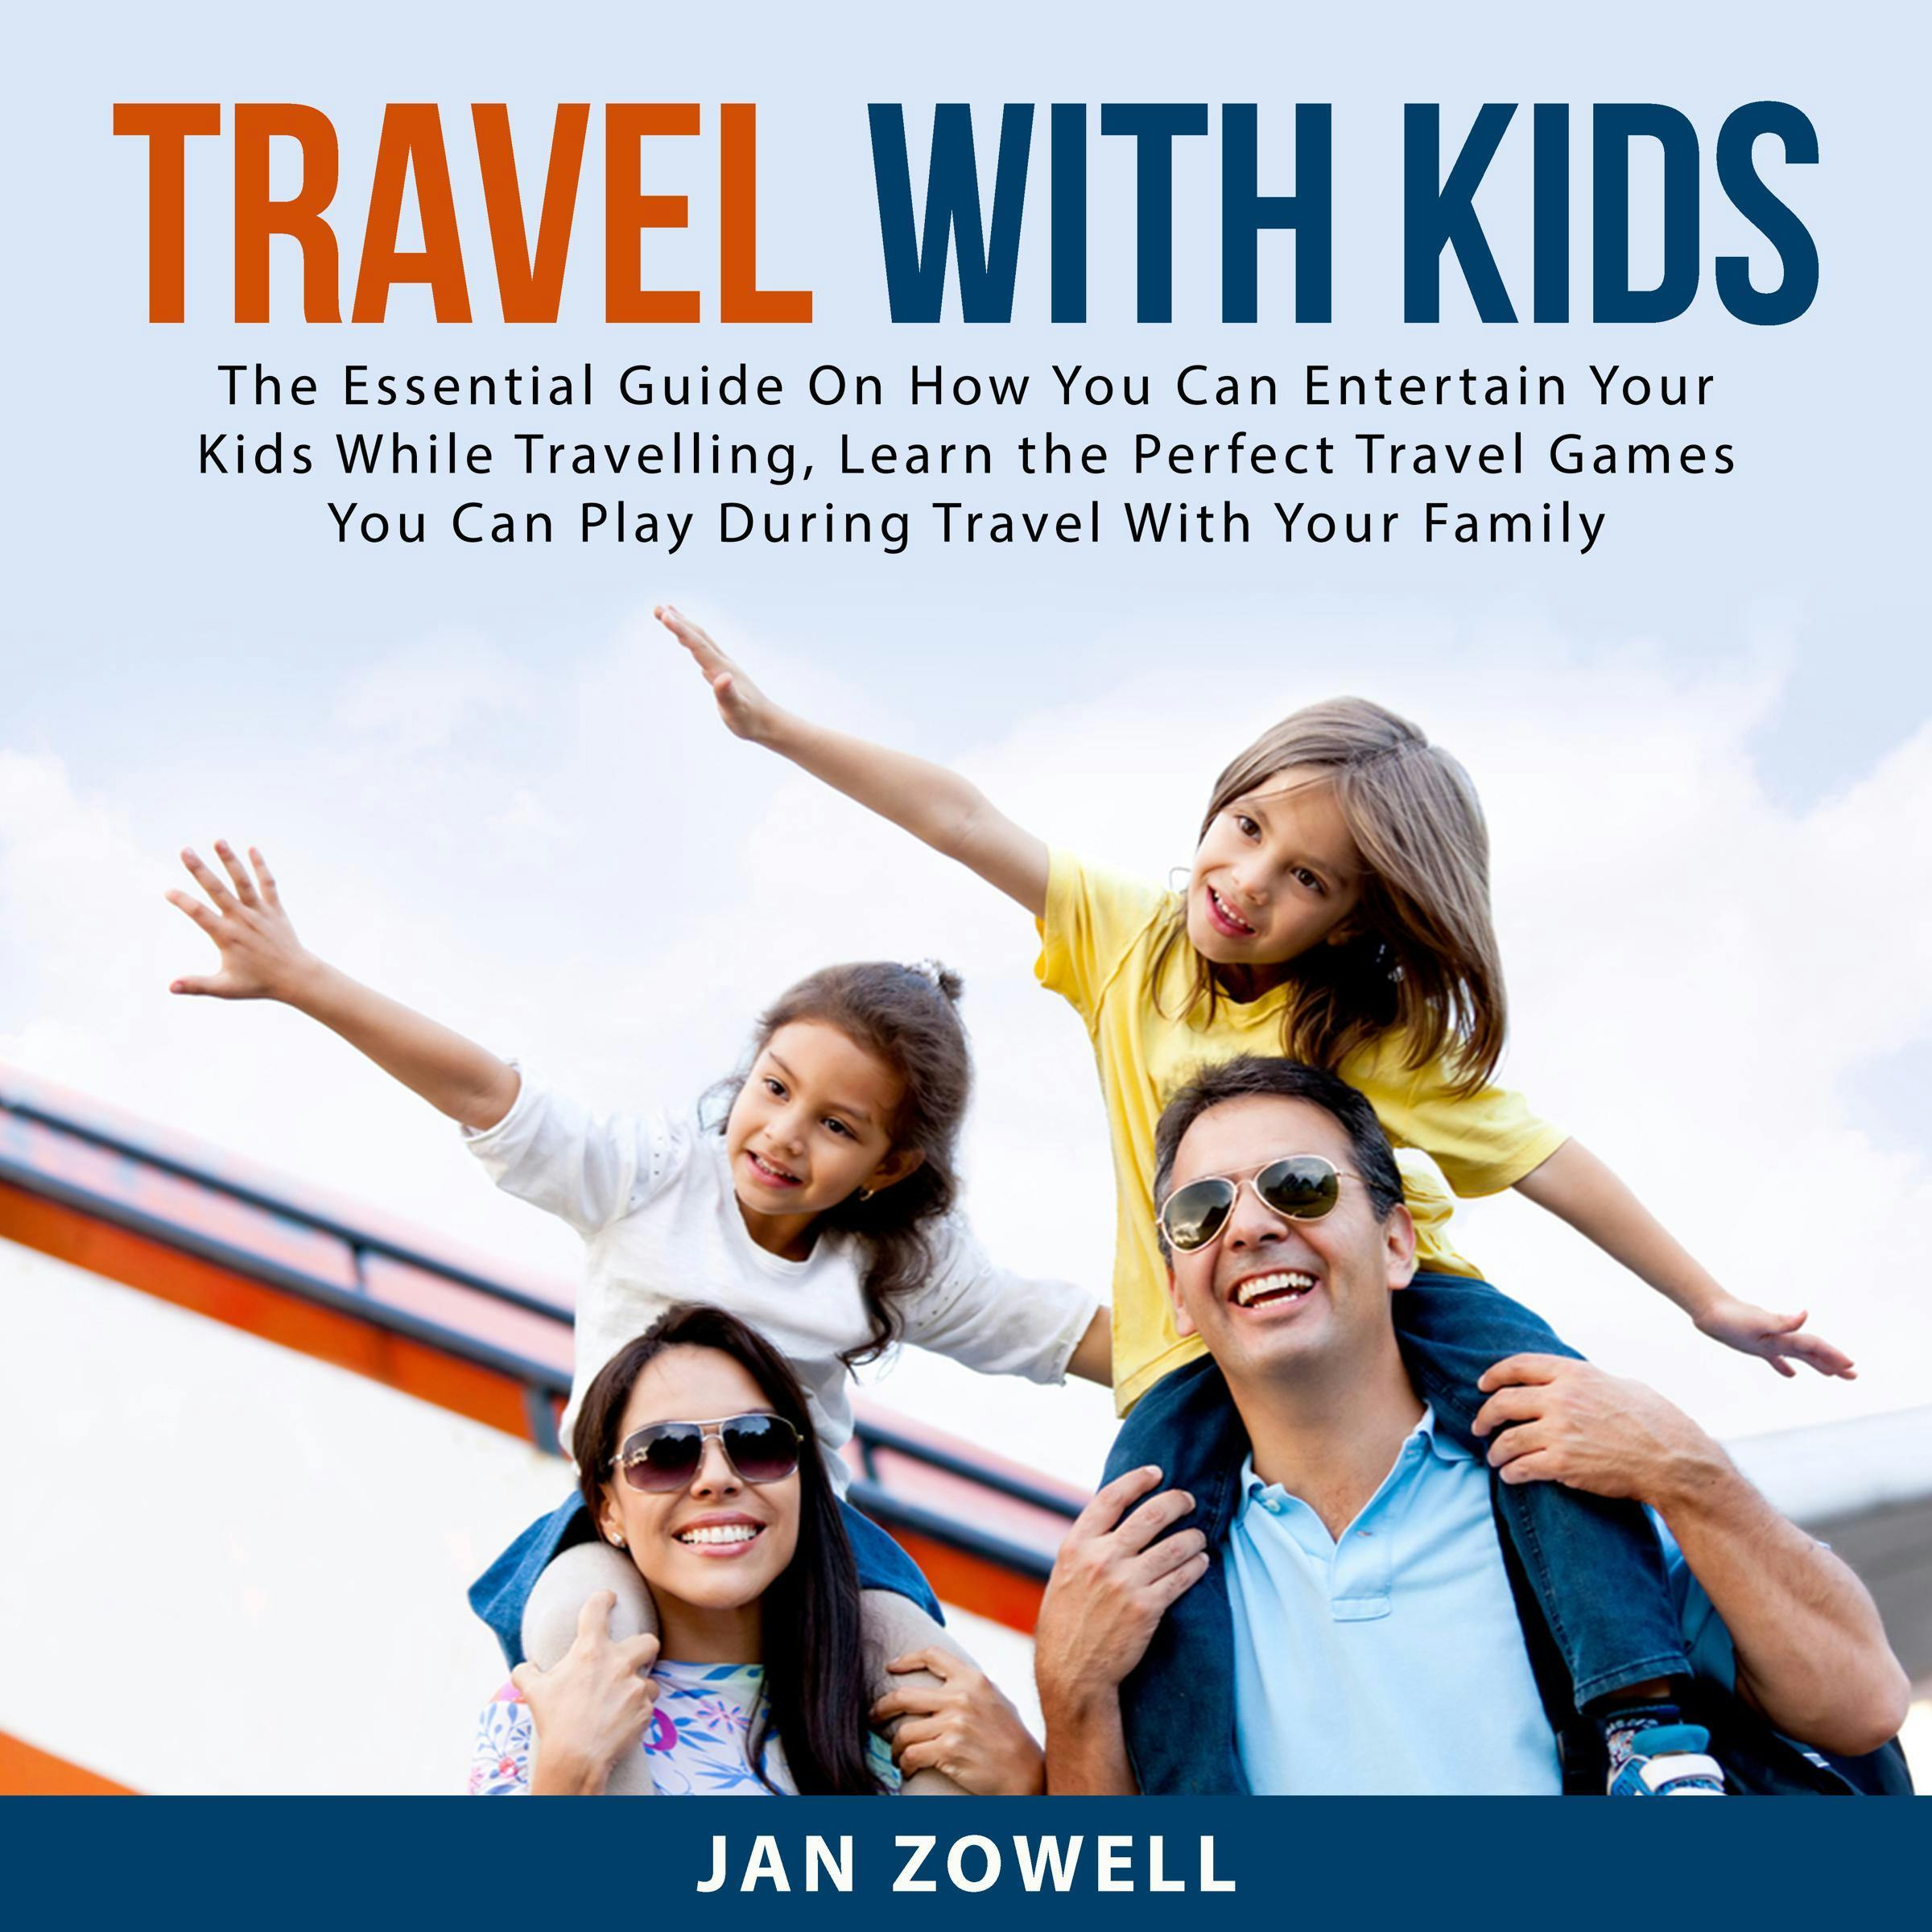 Travel With Kids: The Essential Guide On How You Can Entertain Your Kids While Travelling, Learn the Perfect Travel Games You Can Play During Travel With Your Family - undefined